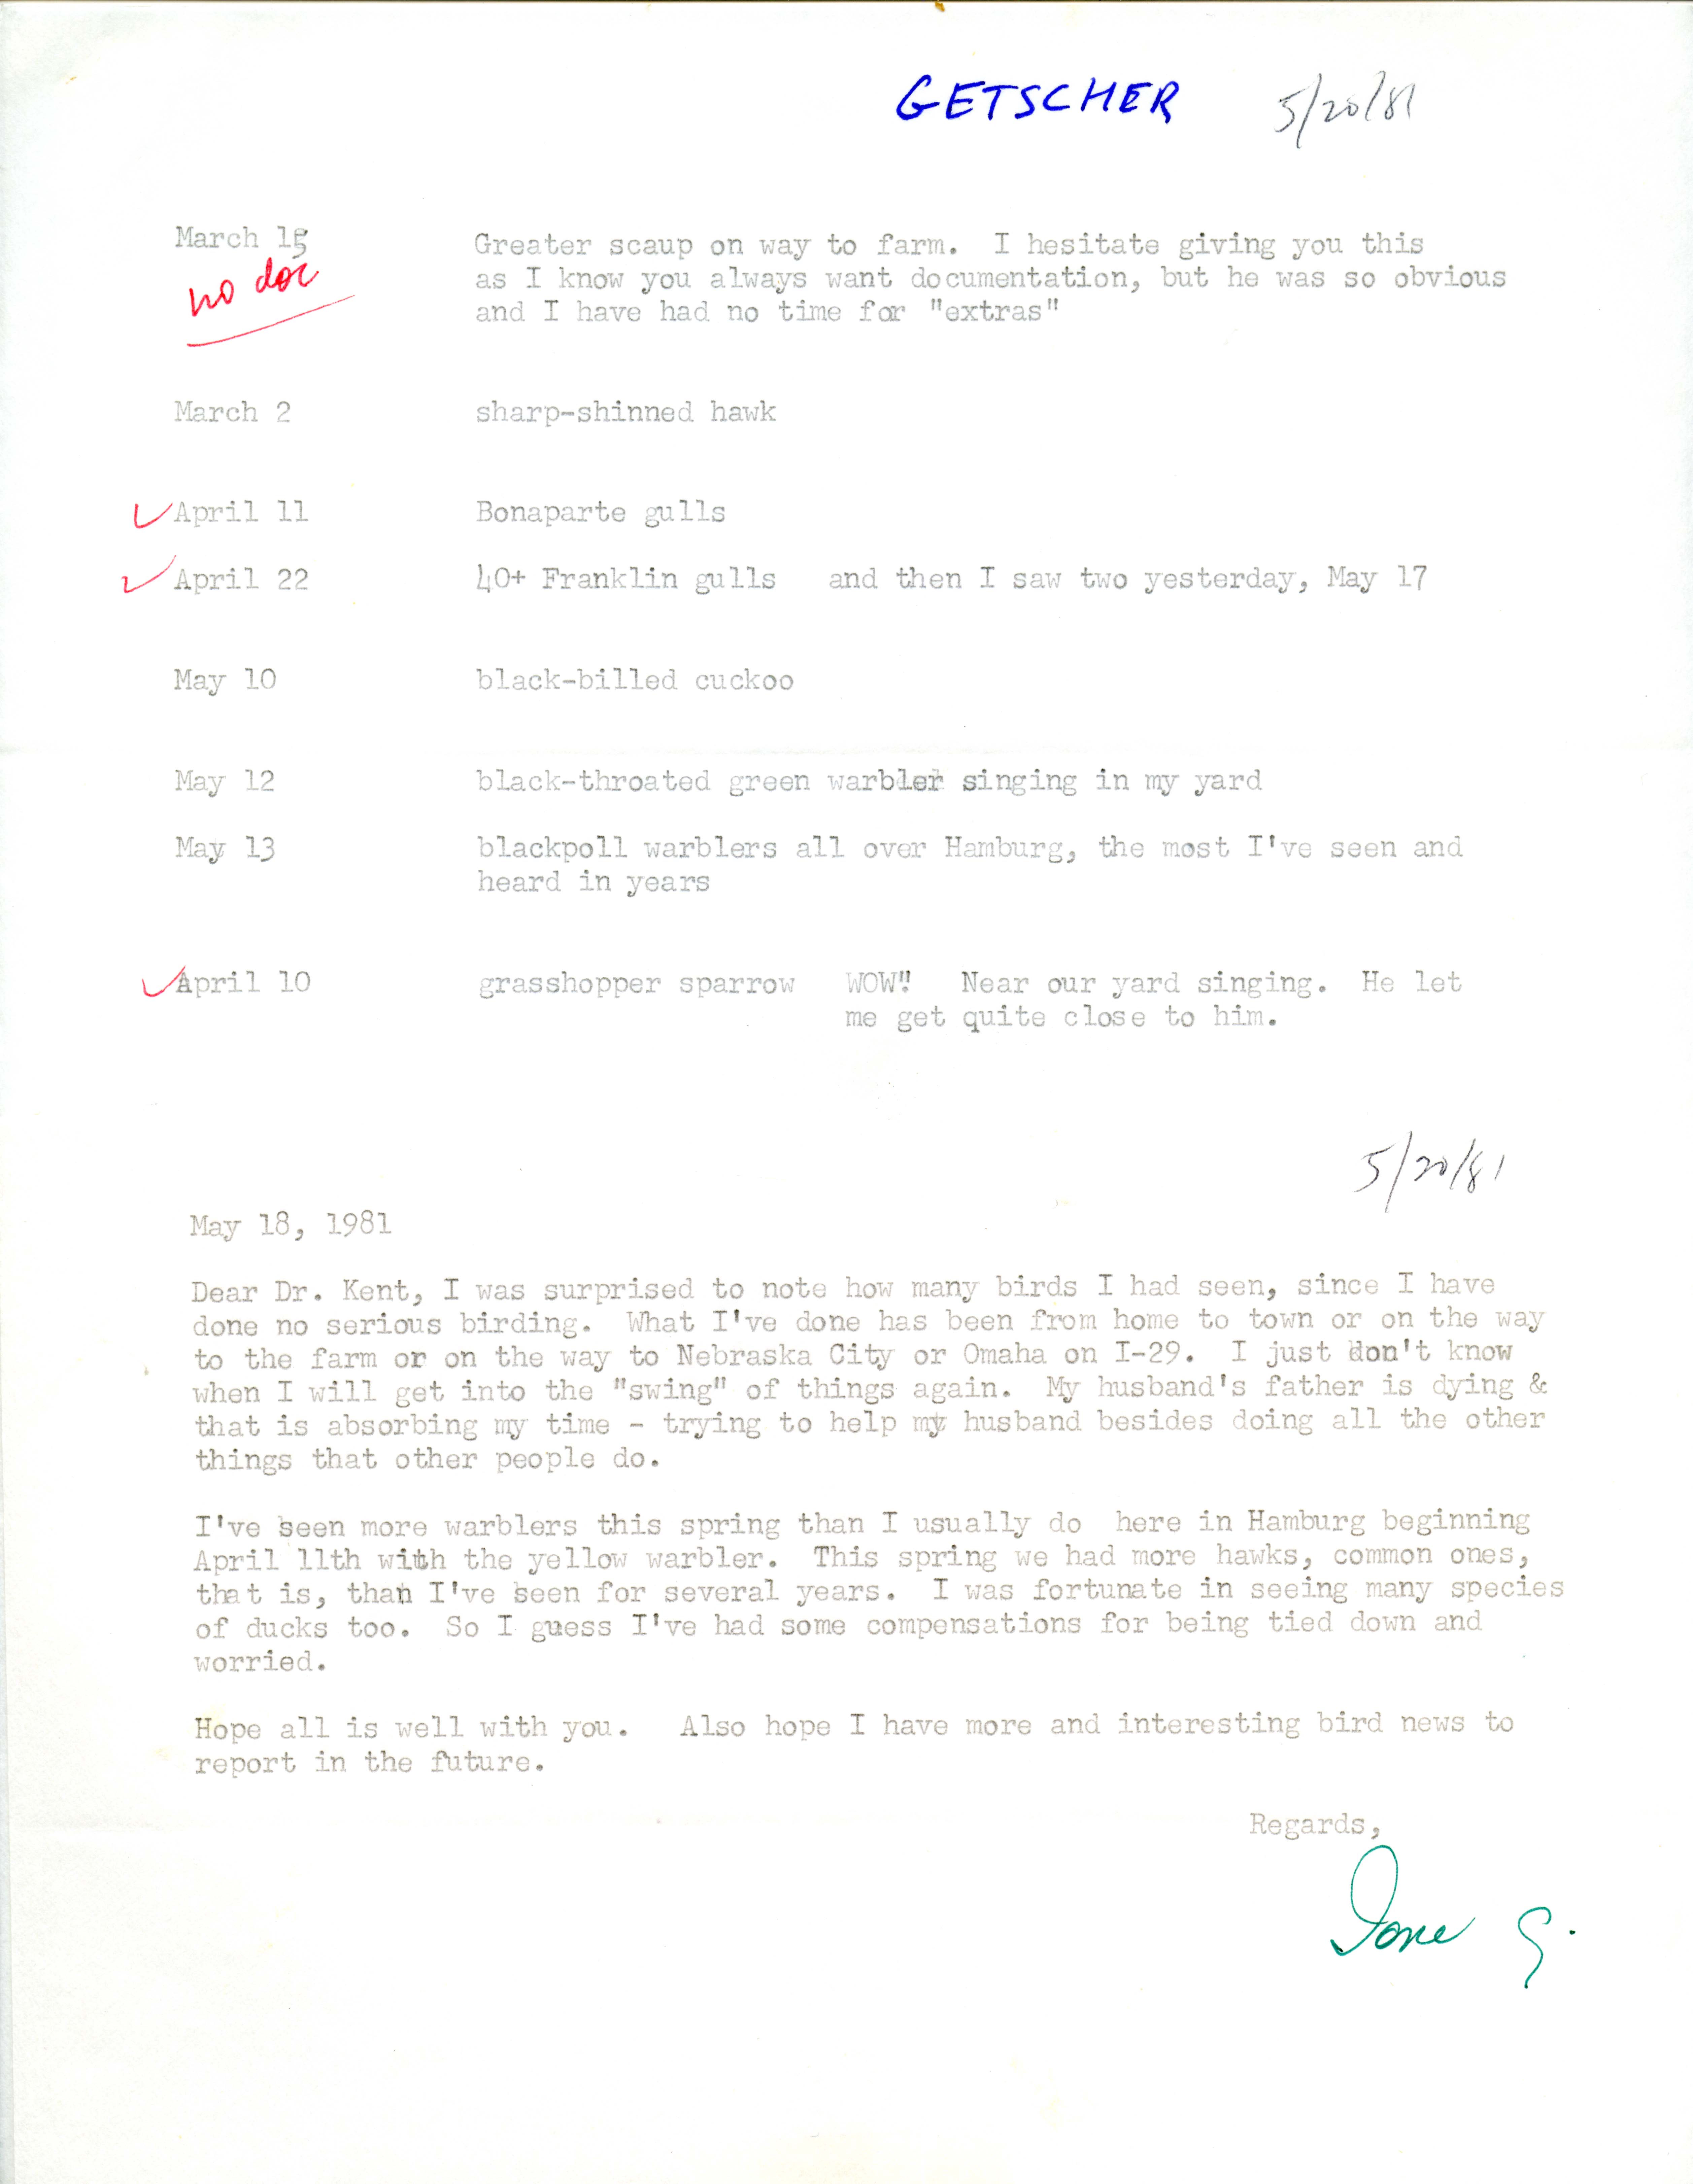 Ione Getscher letter to Thomas Kent regarding Spring sightings, May 18, 1981